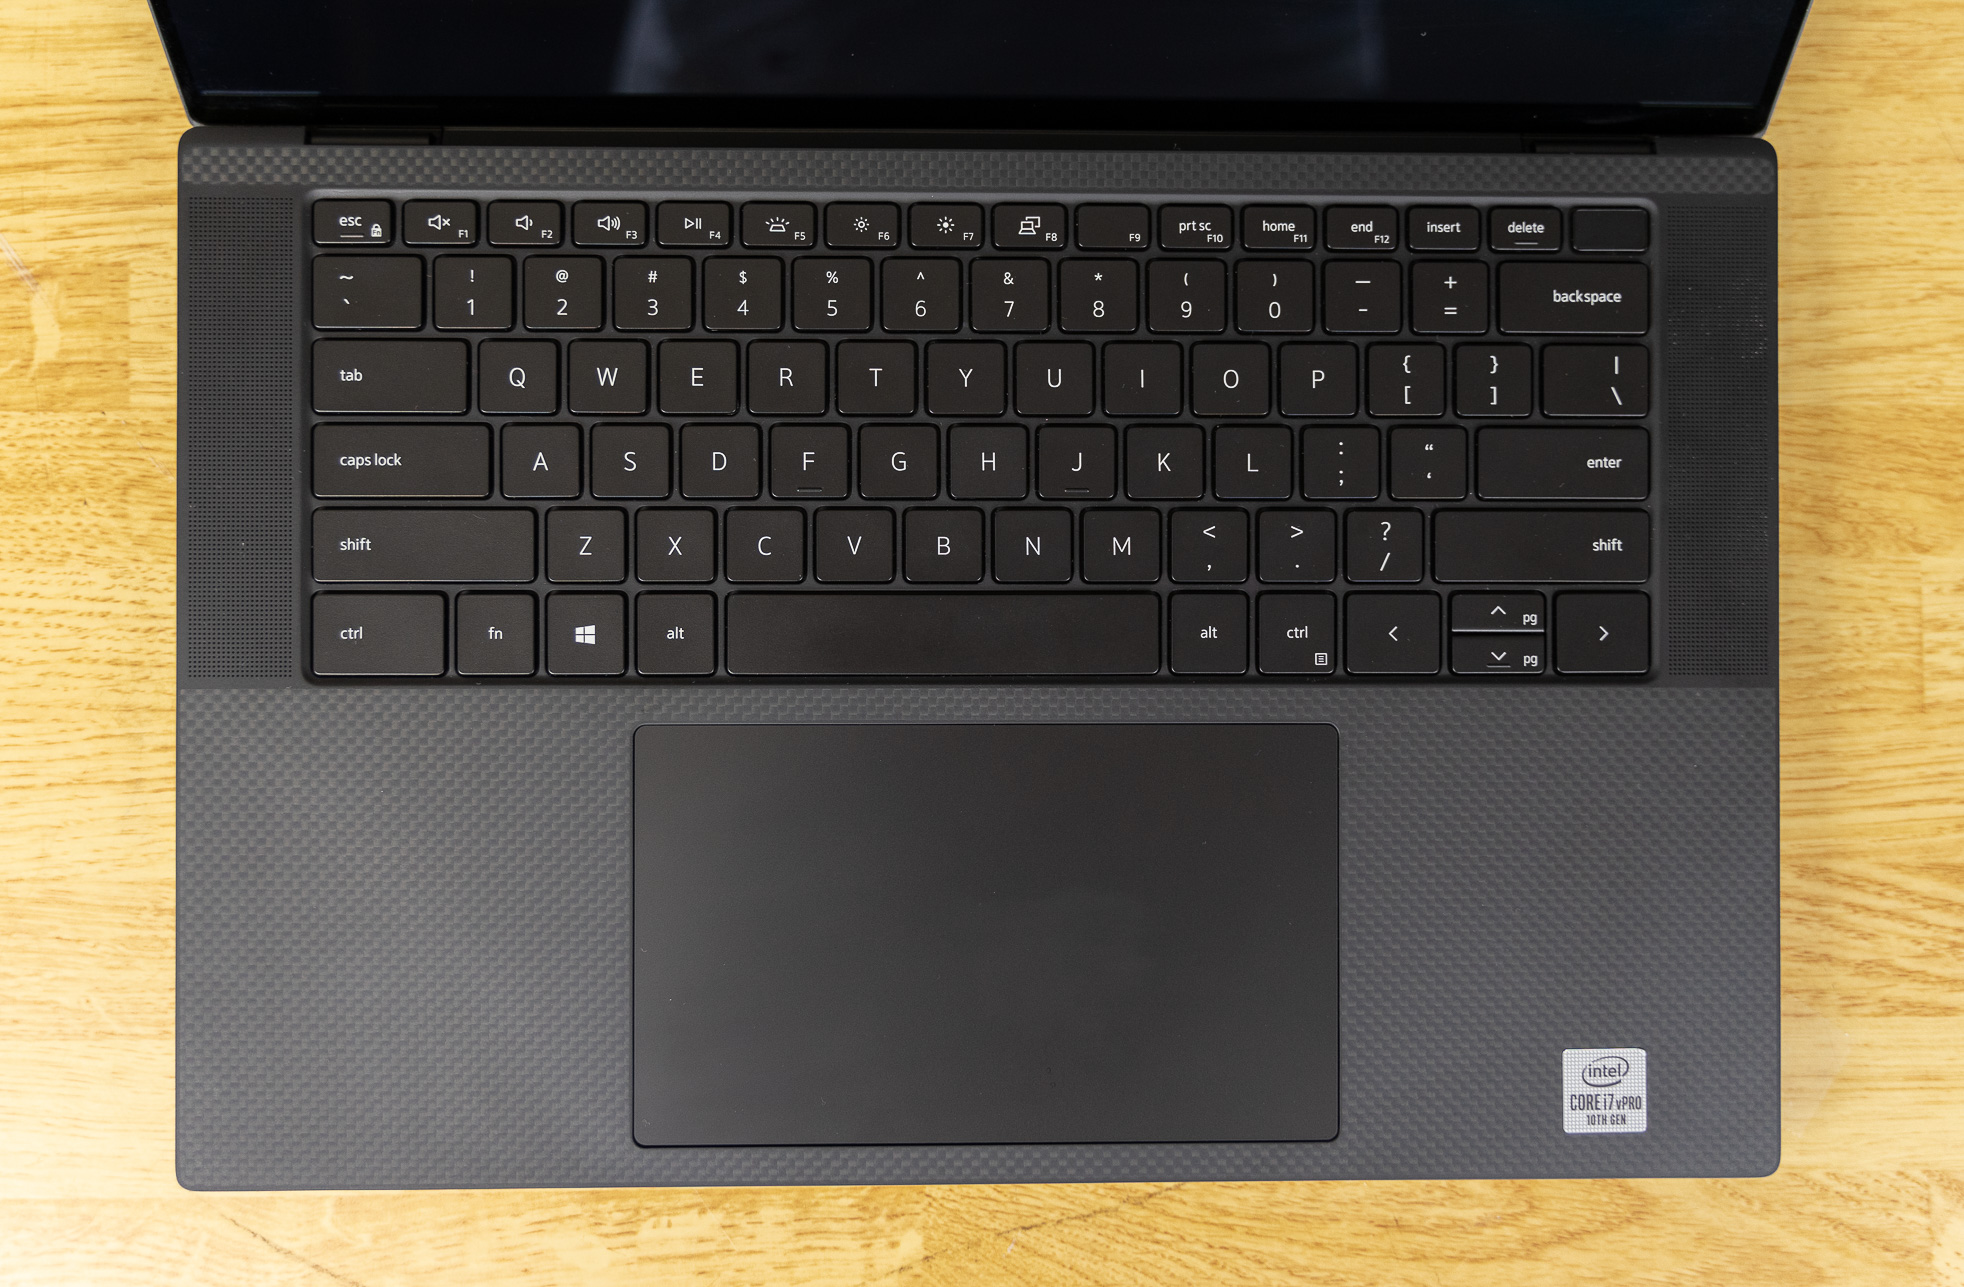 Dell Precision 5550 workstation laptop review: nearly perfect